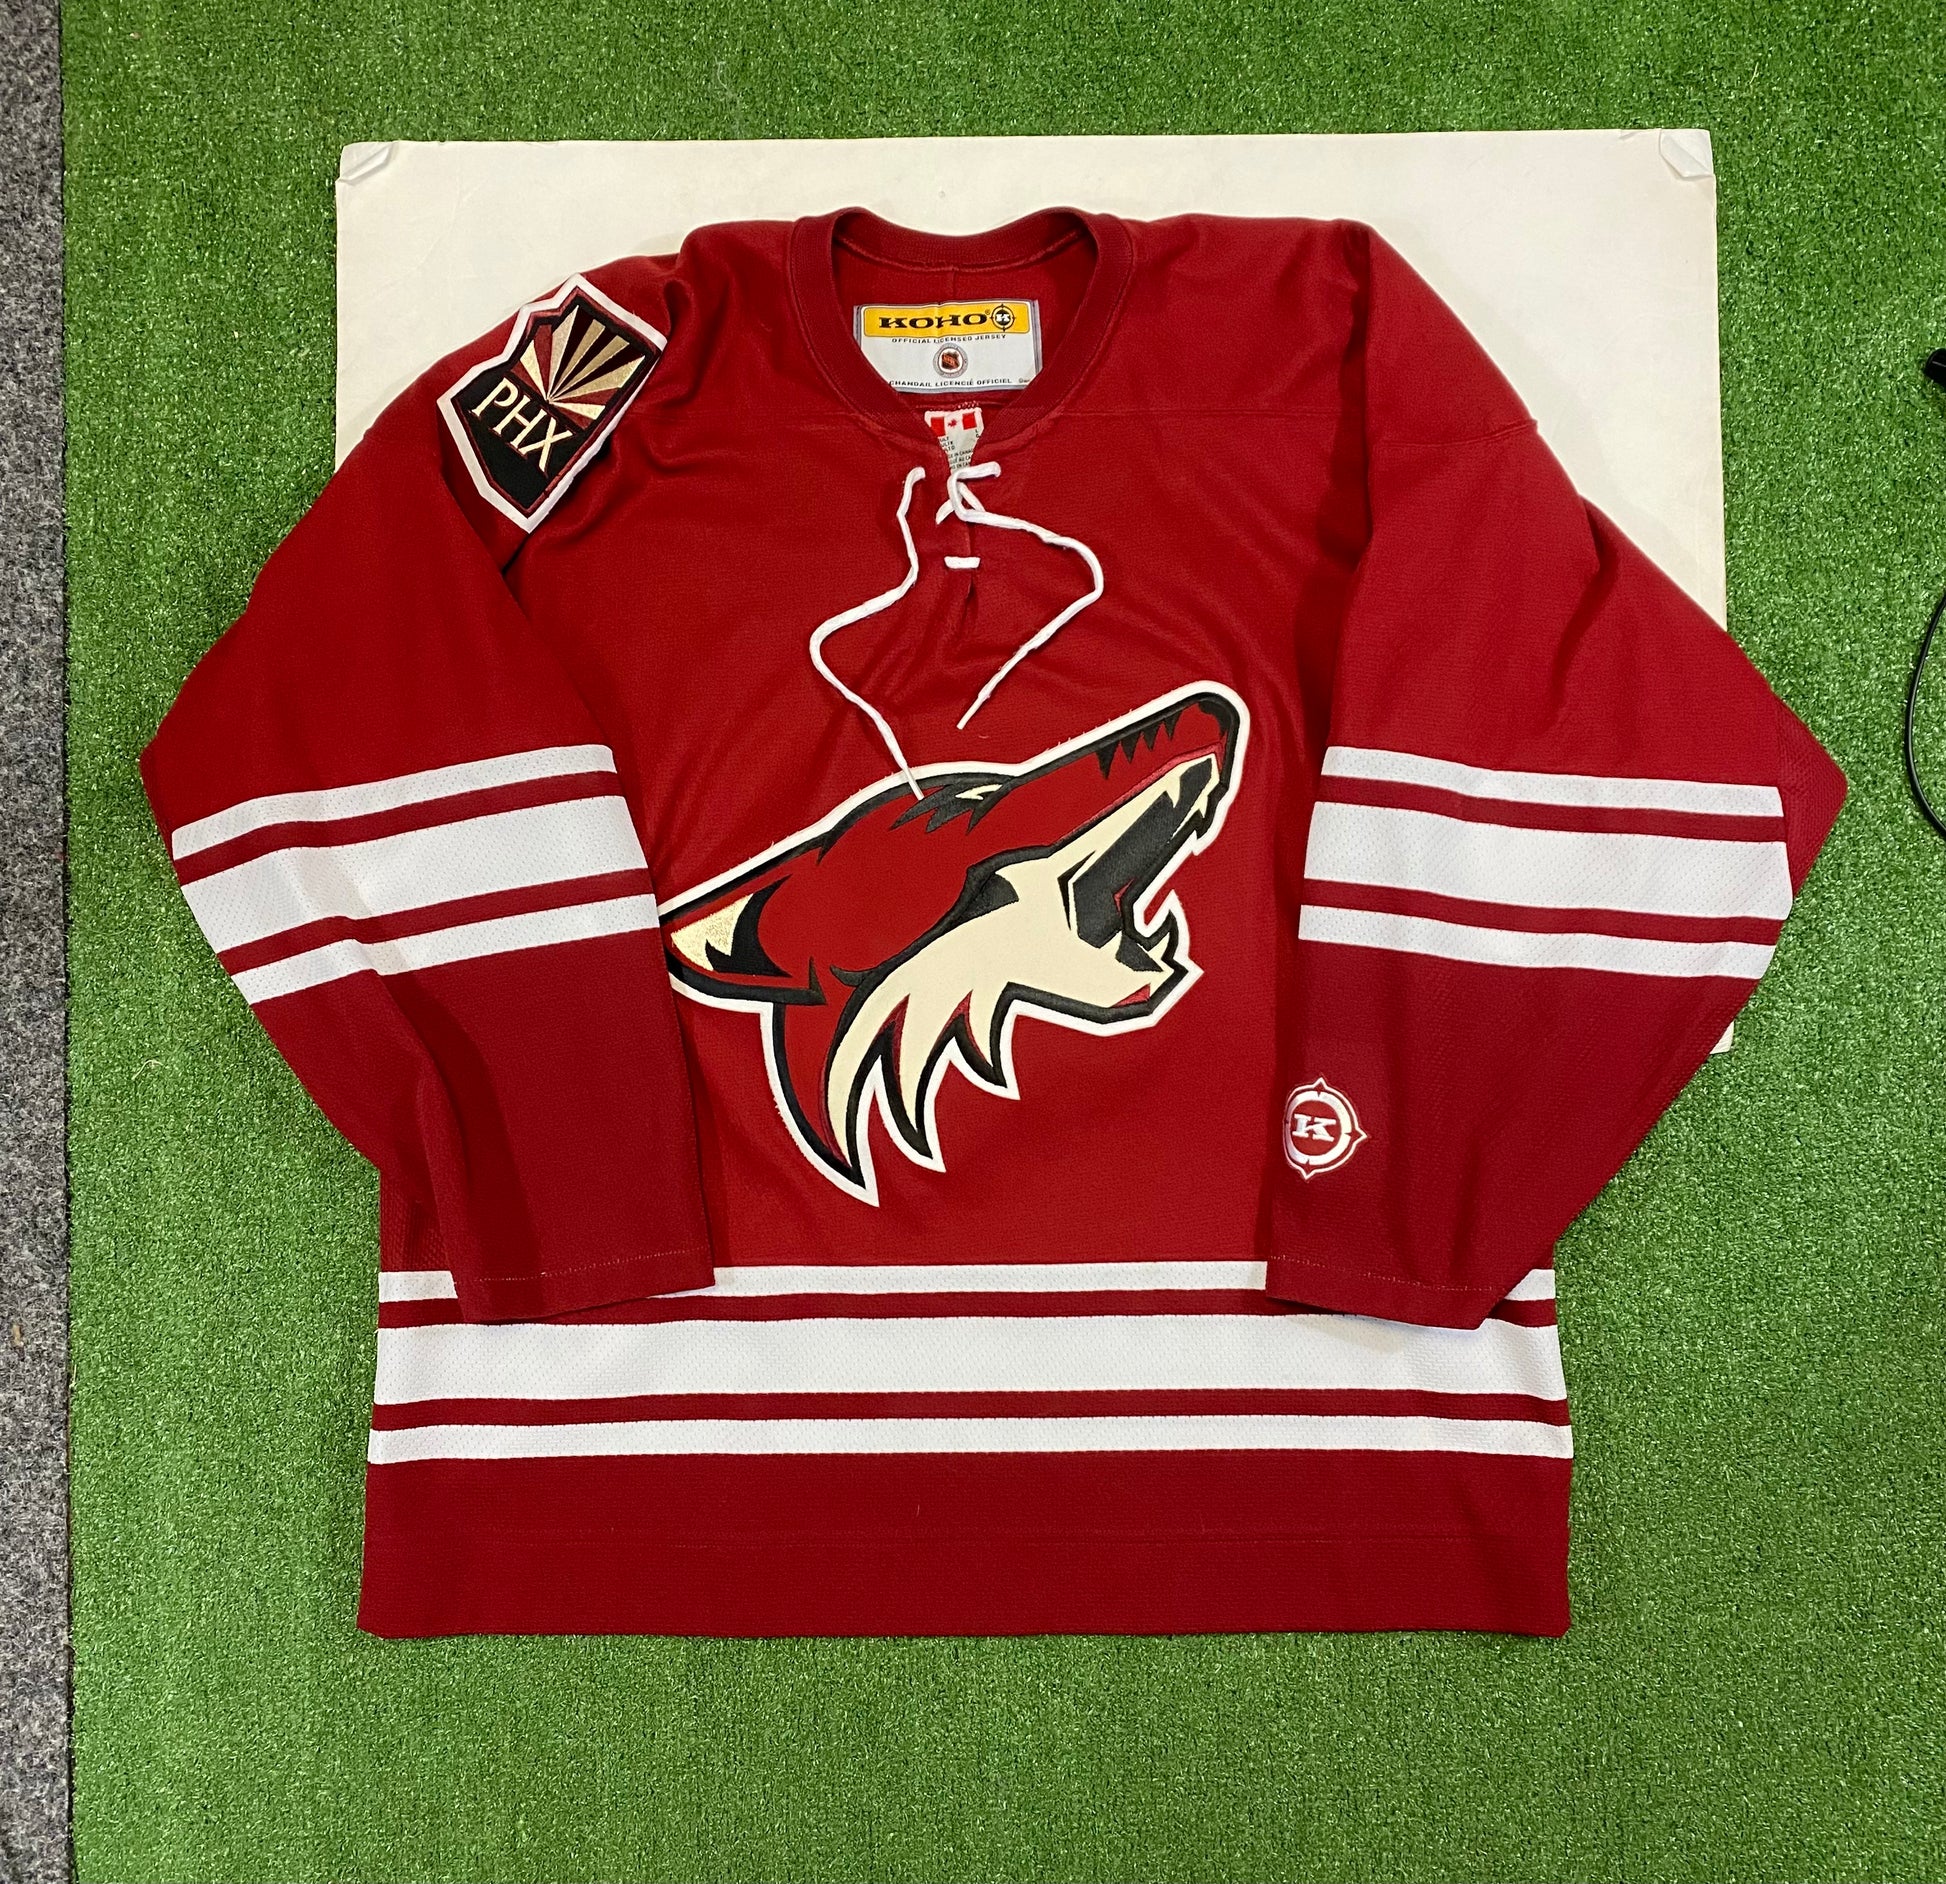 Coyotes nhl jersey